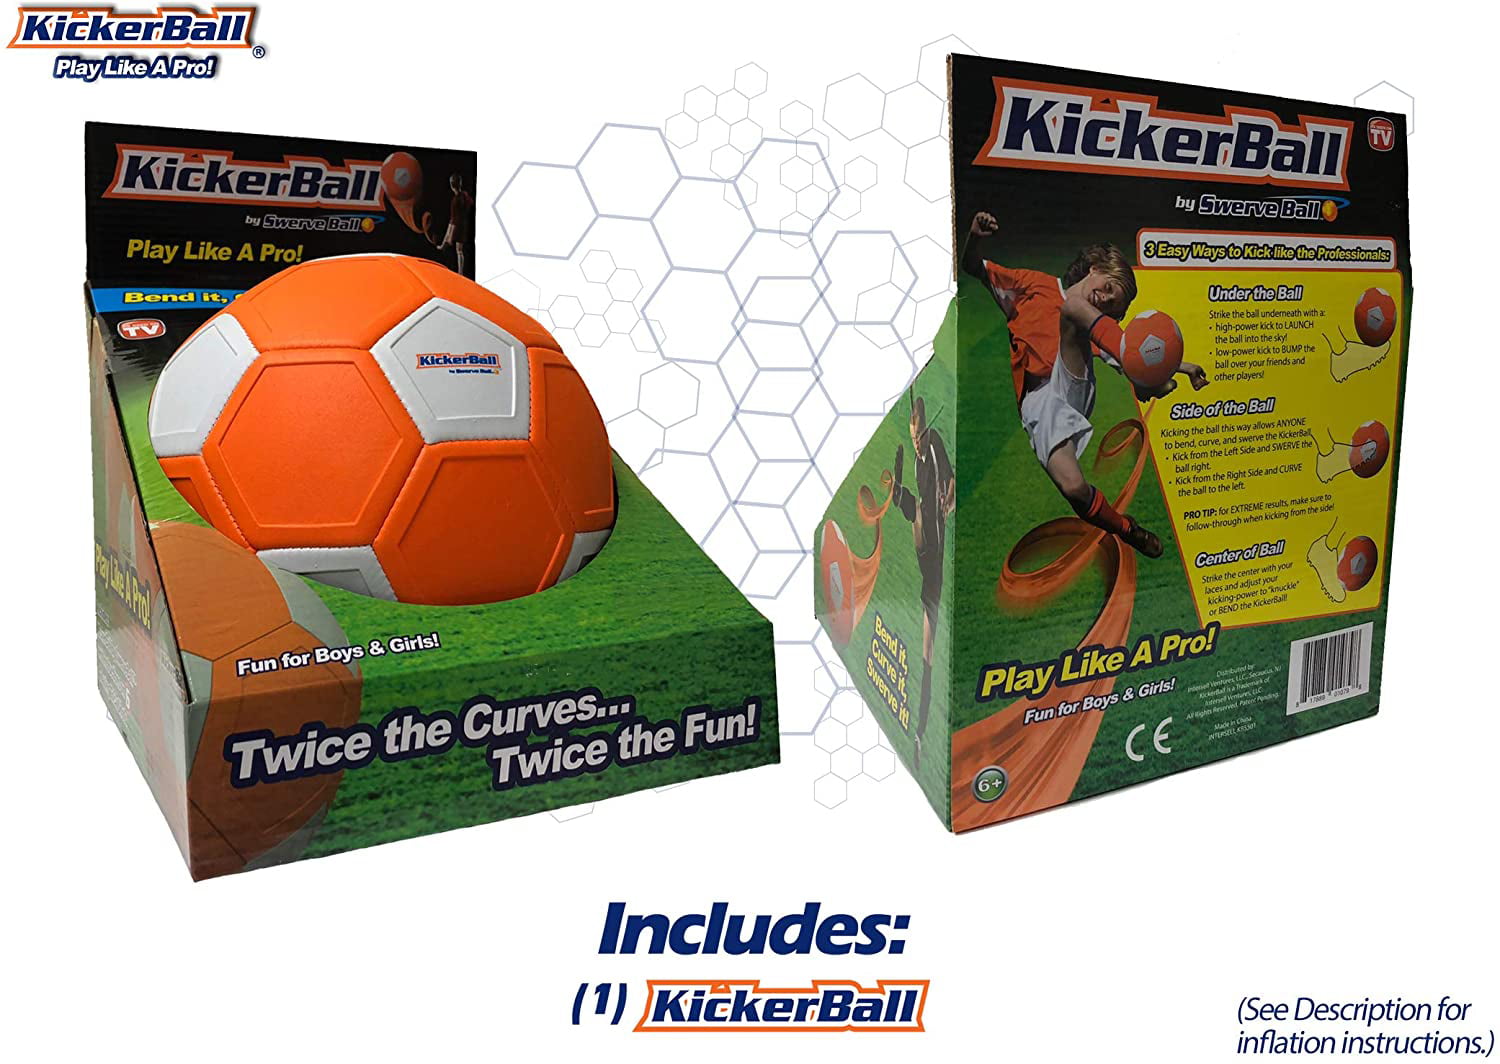 KickerBall by Swerve Ball for kids boys girls fun for summer  GIFT NEW